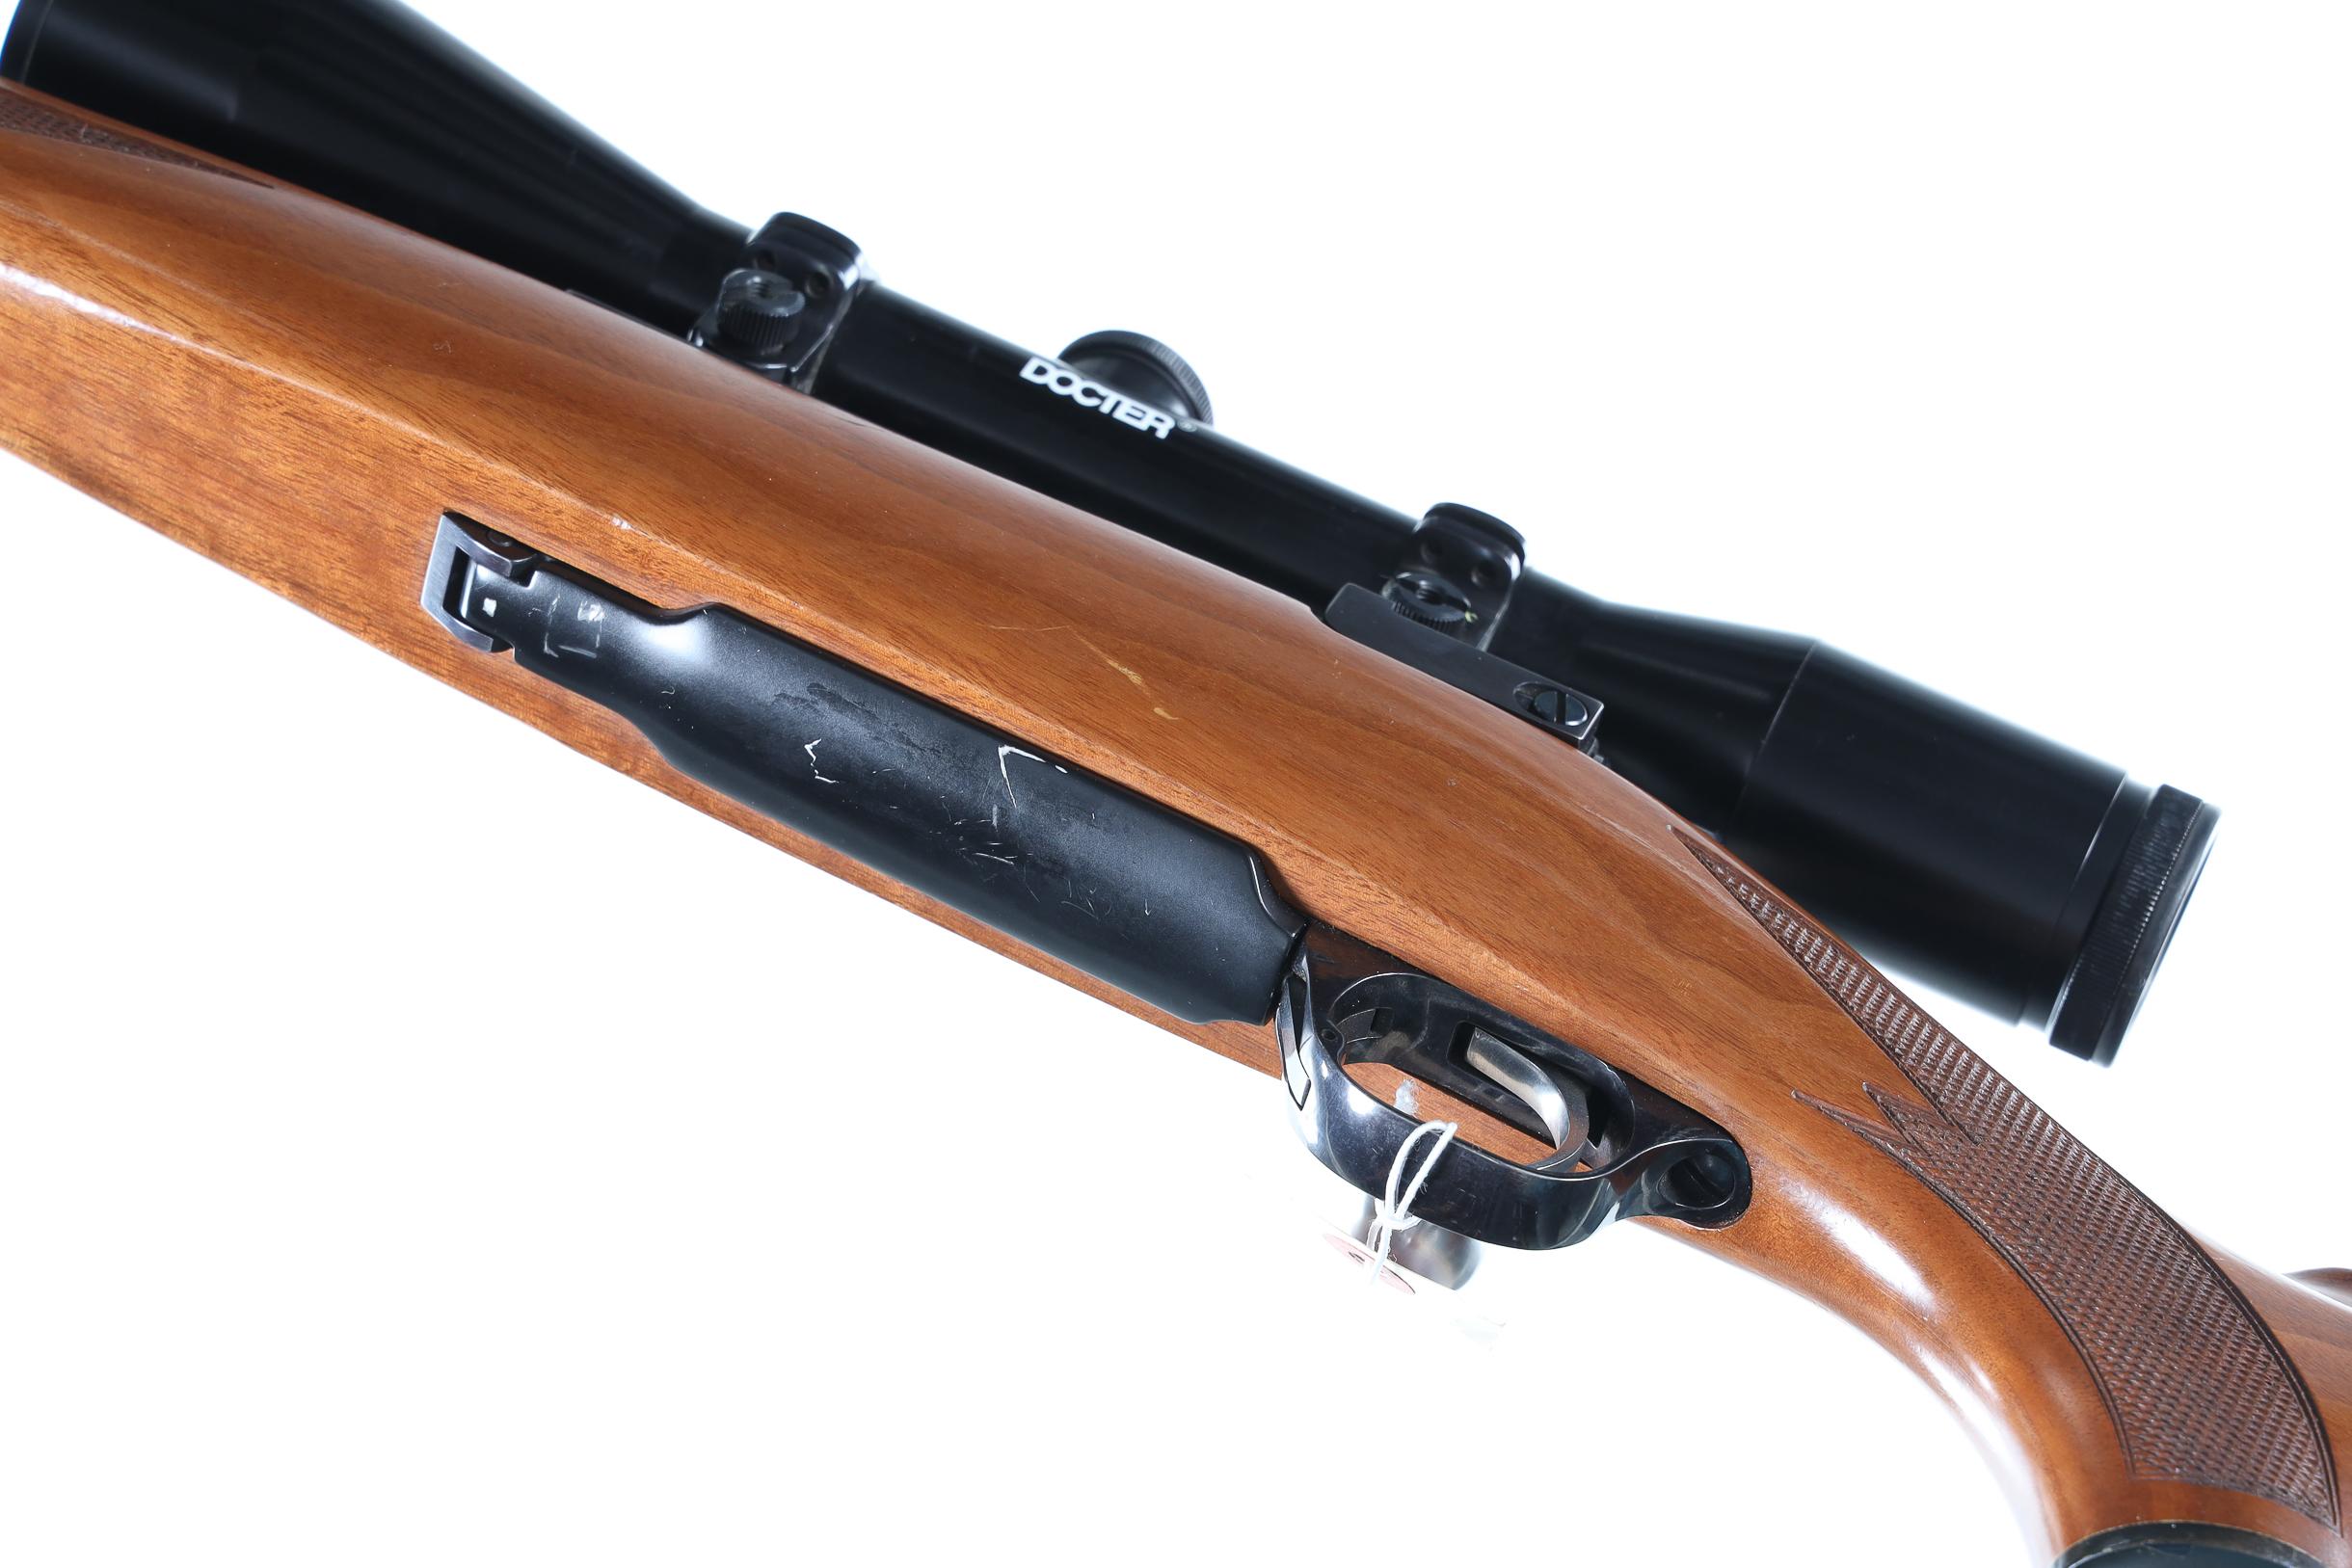 Ruger M77 Mark II RSI Bolt Rifle .243 win